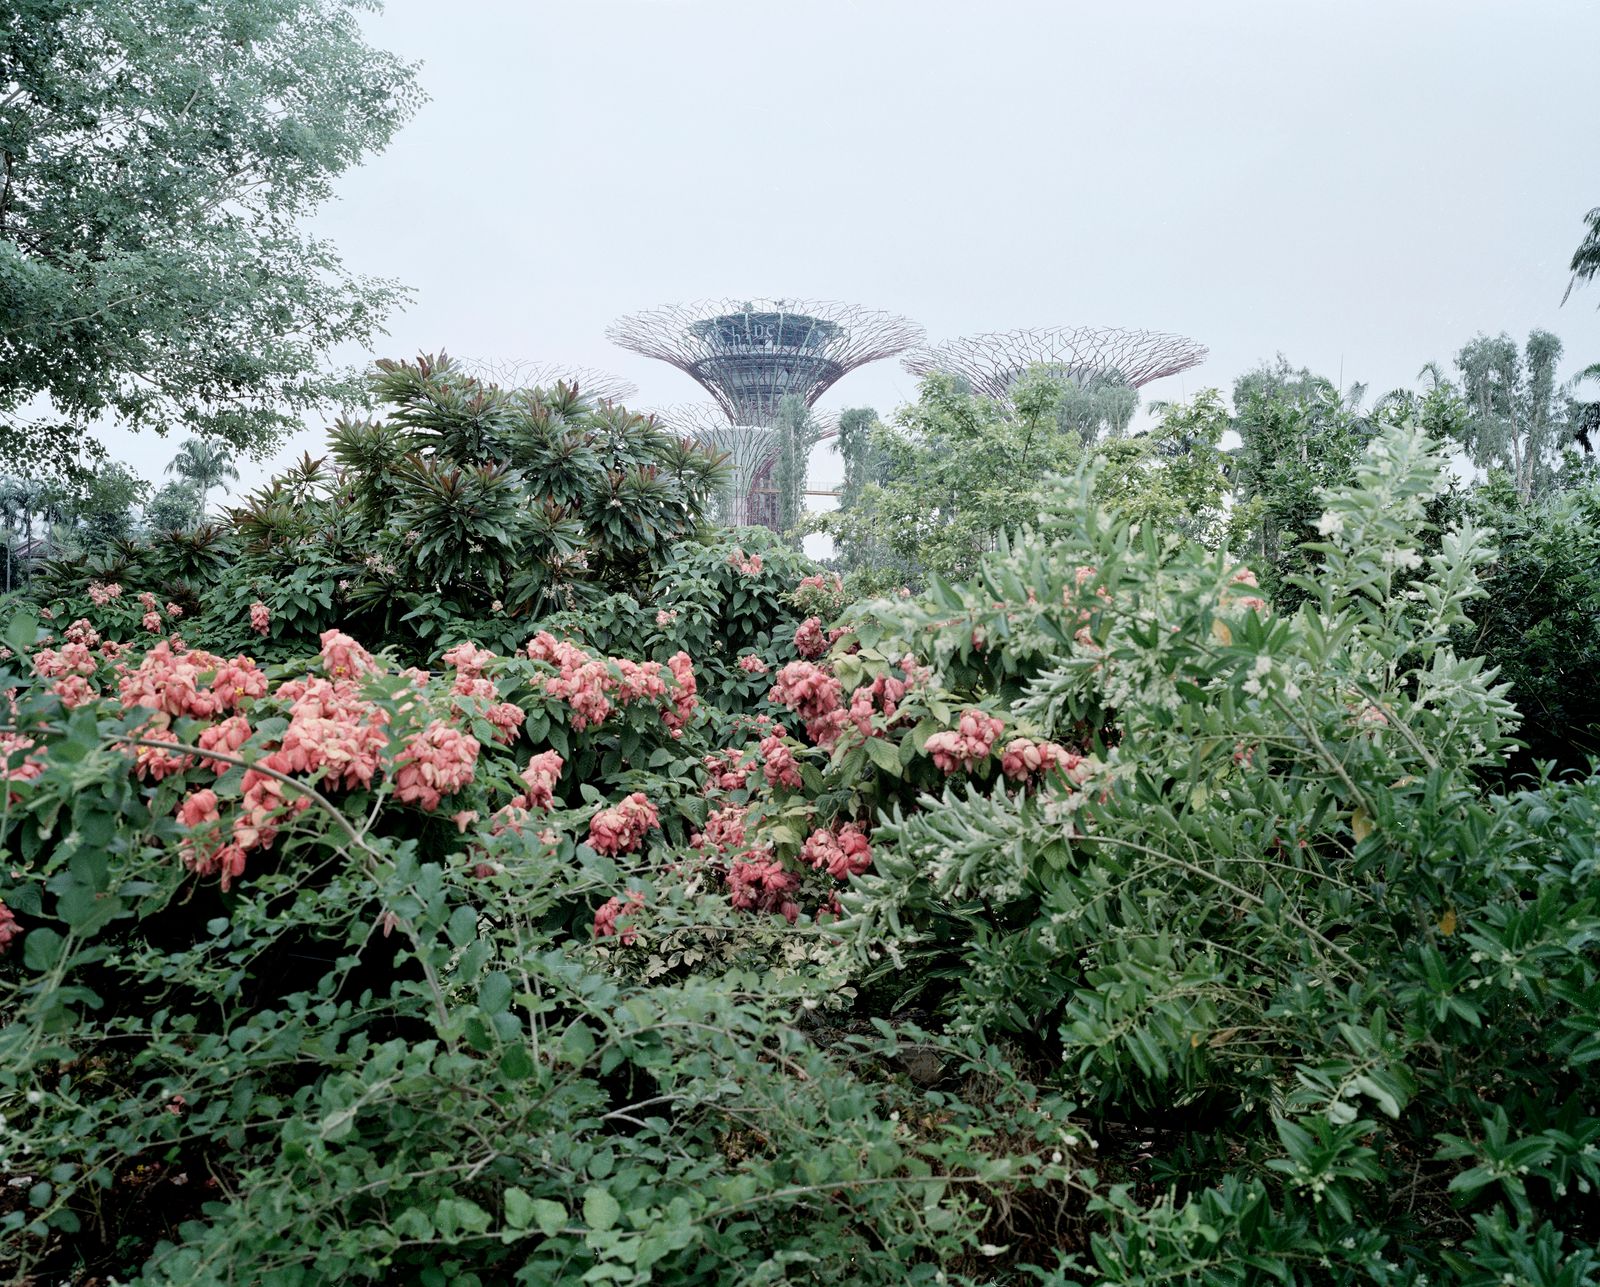 © Giulio Di Sturco - Image from the Aerotropolis, the way we will live next photography project